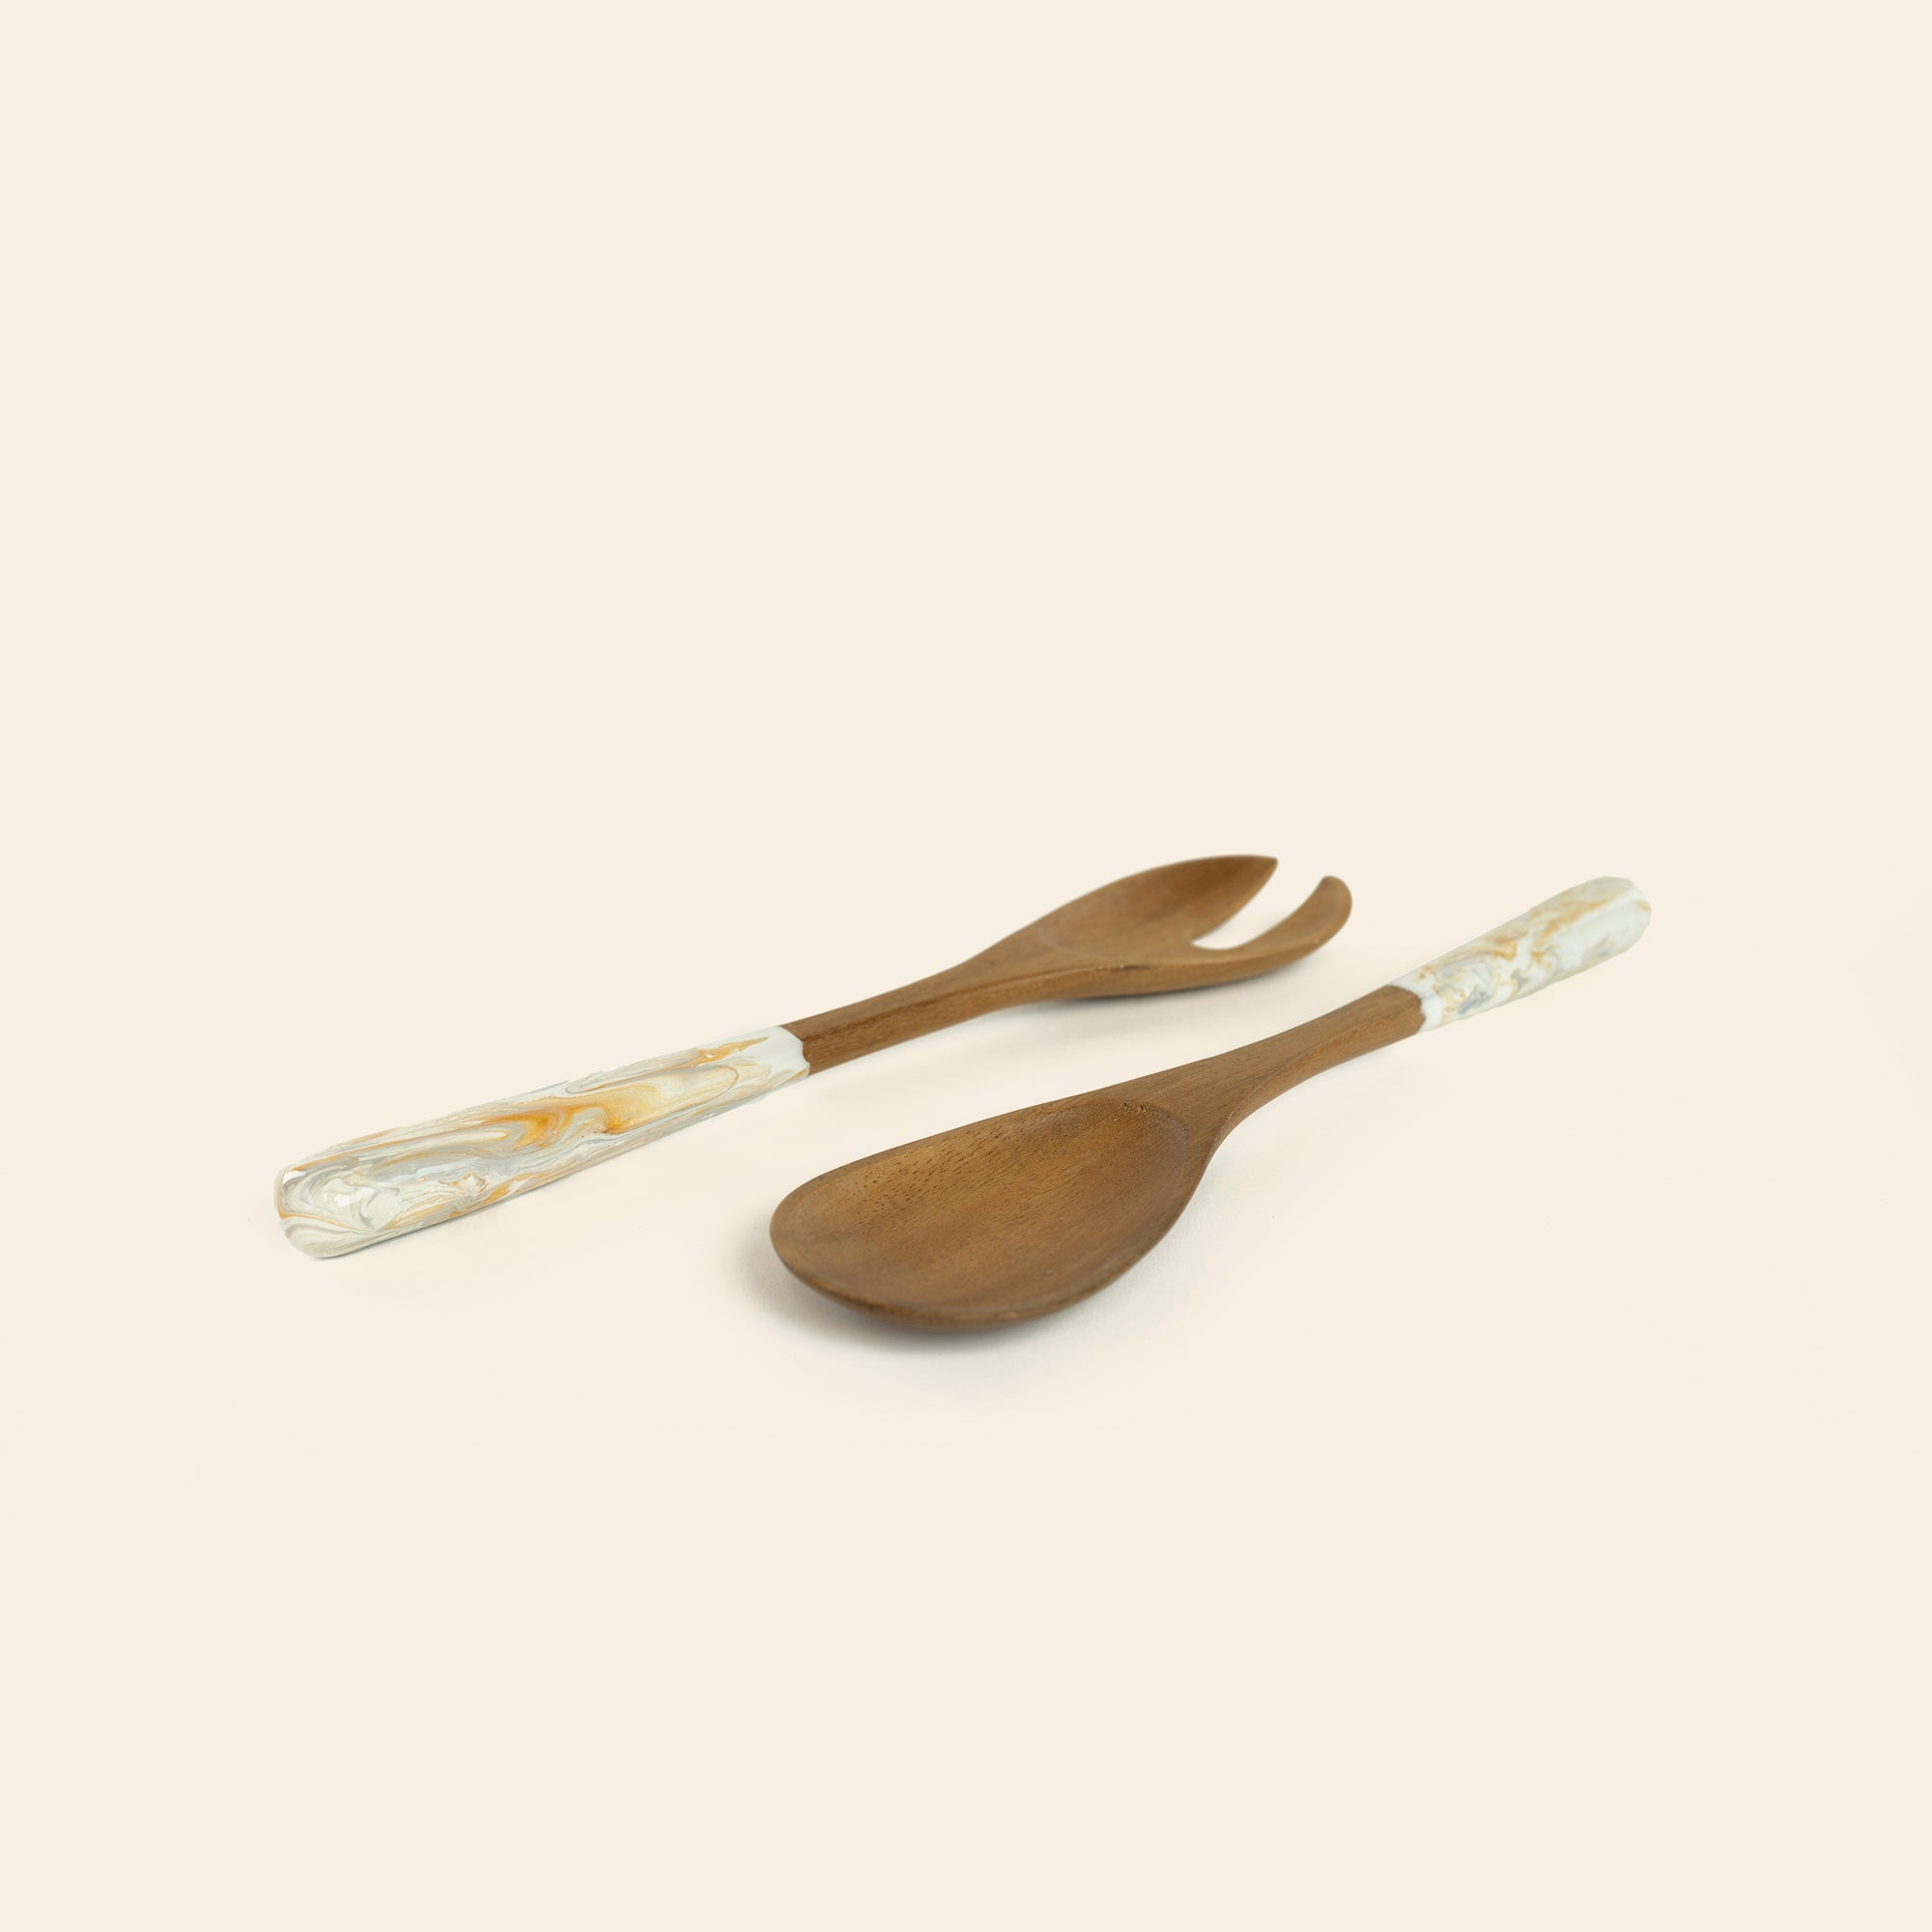 14" Wooden Salad Spoon and Fork (Pair)